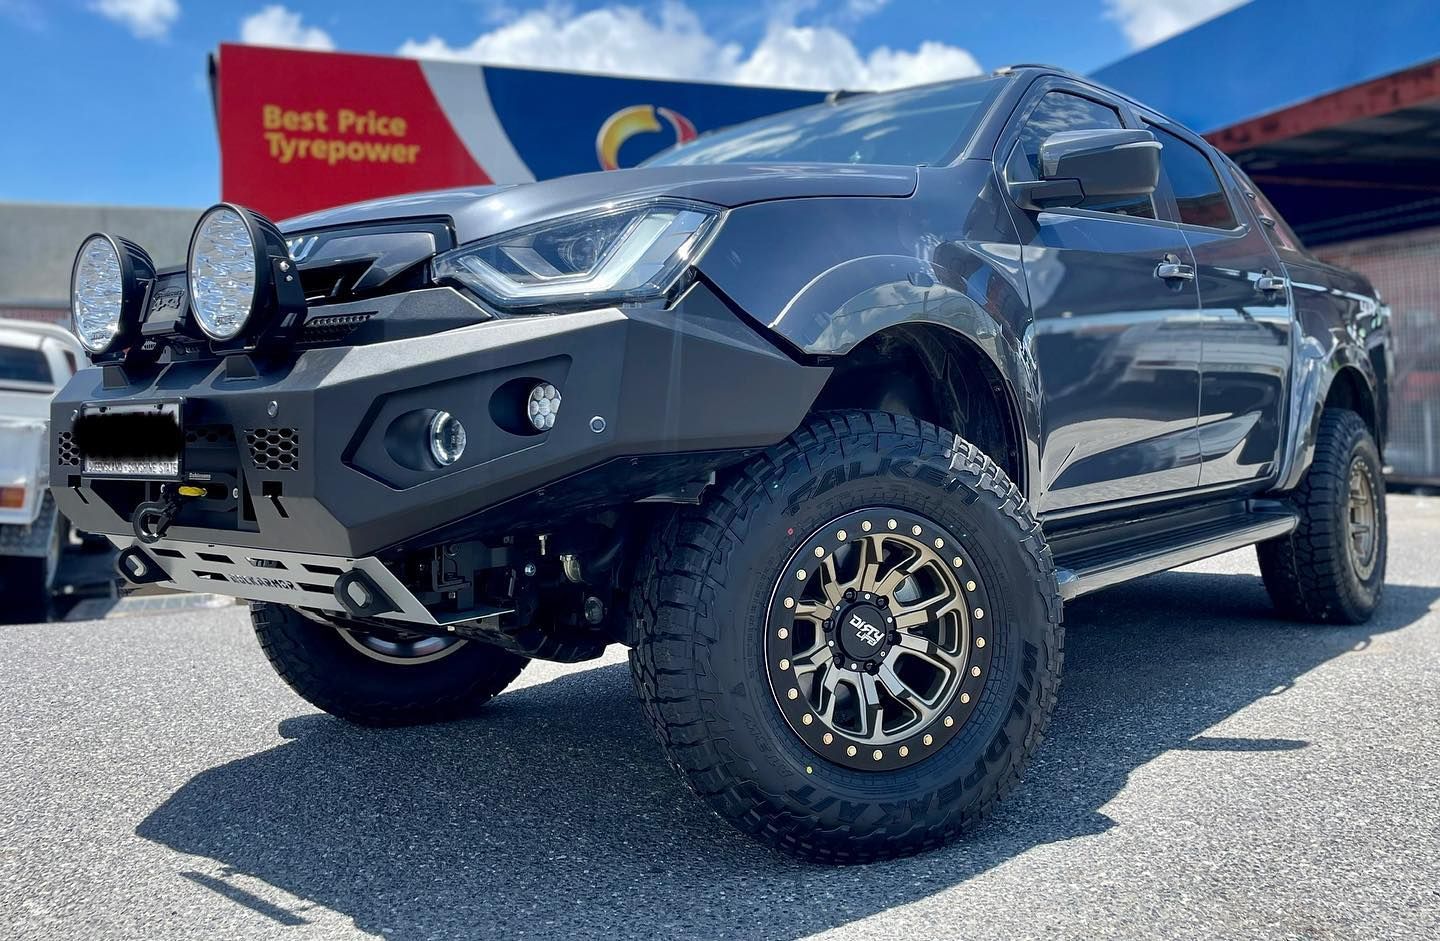 Isuzu D-MAX with 17×9-inch Dirty Life 9303 DT-1